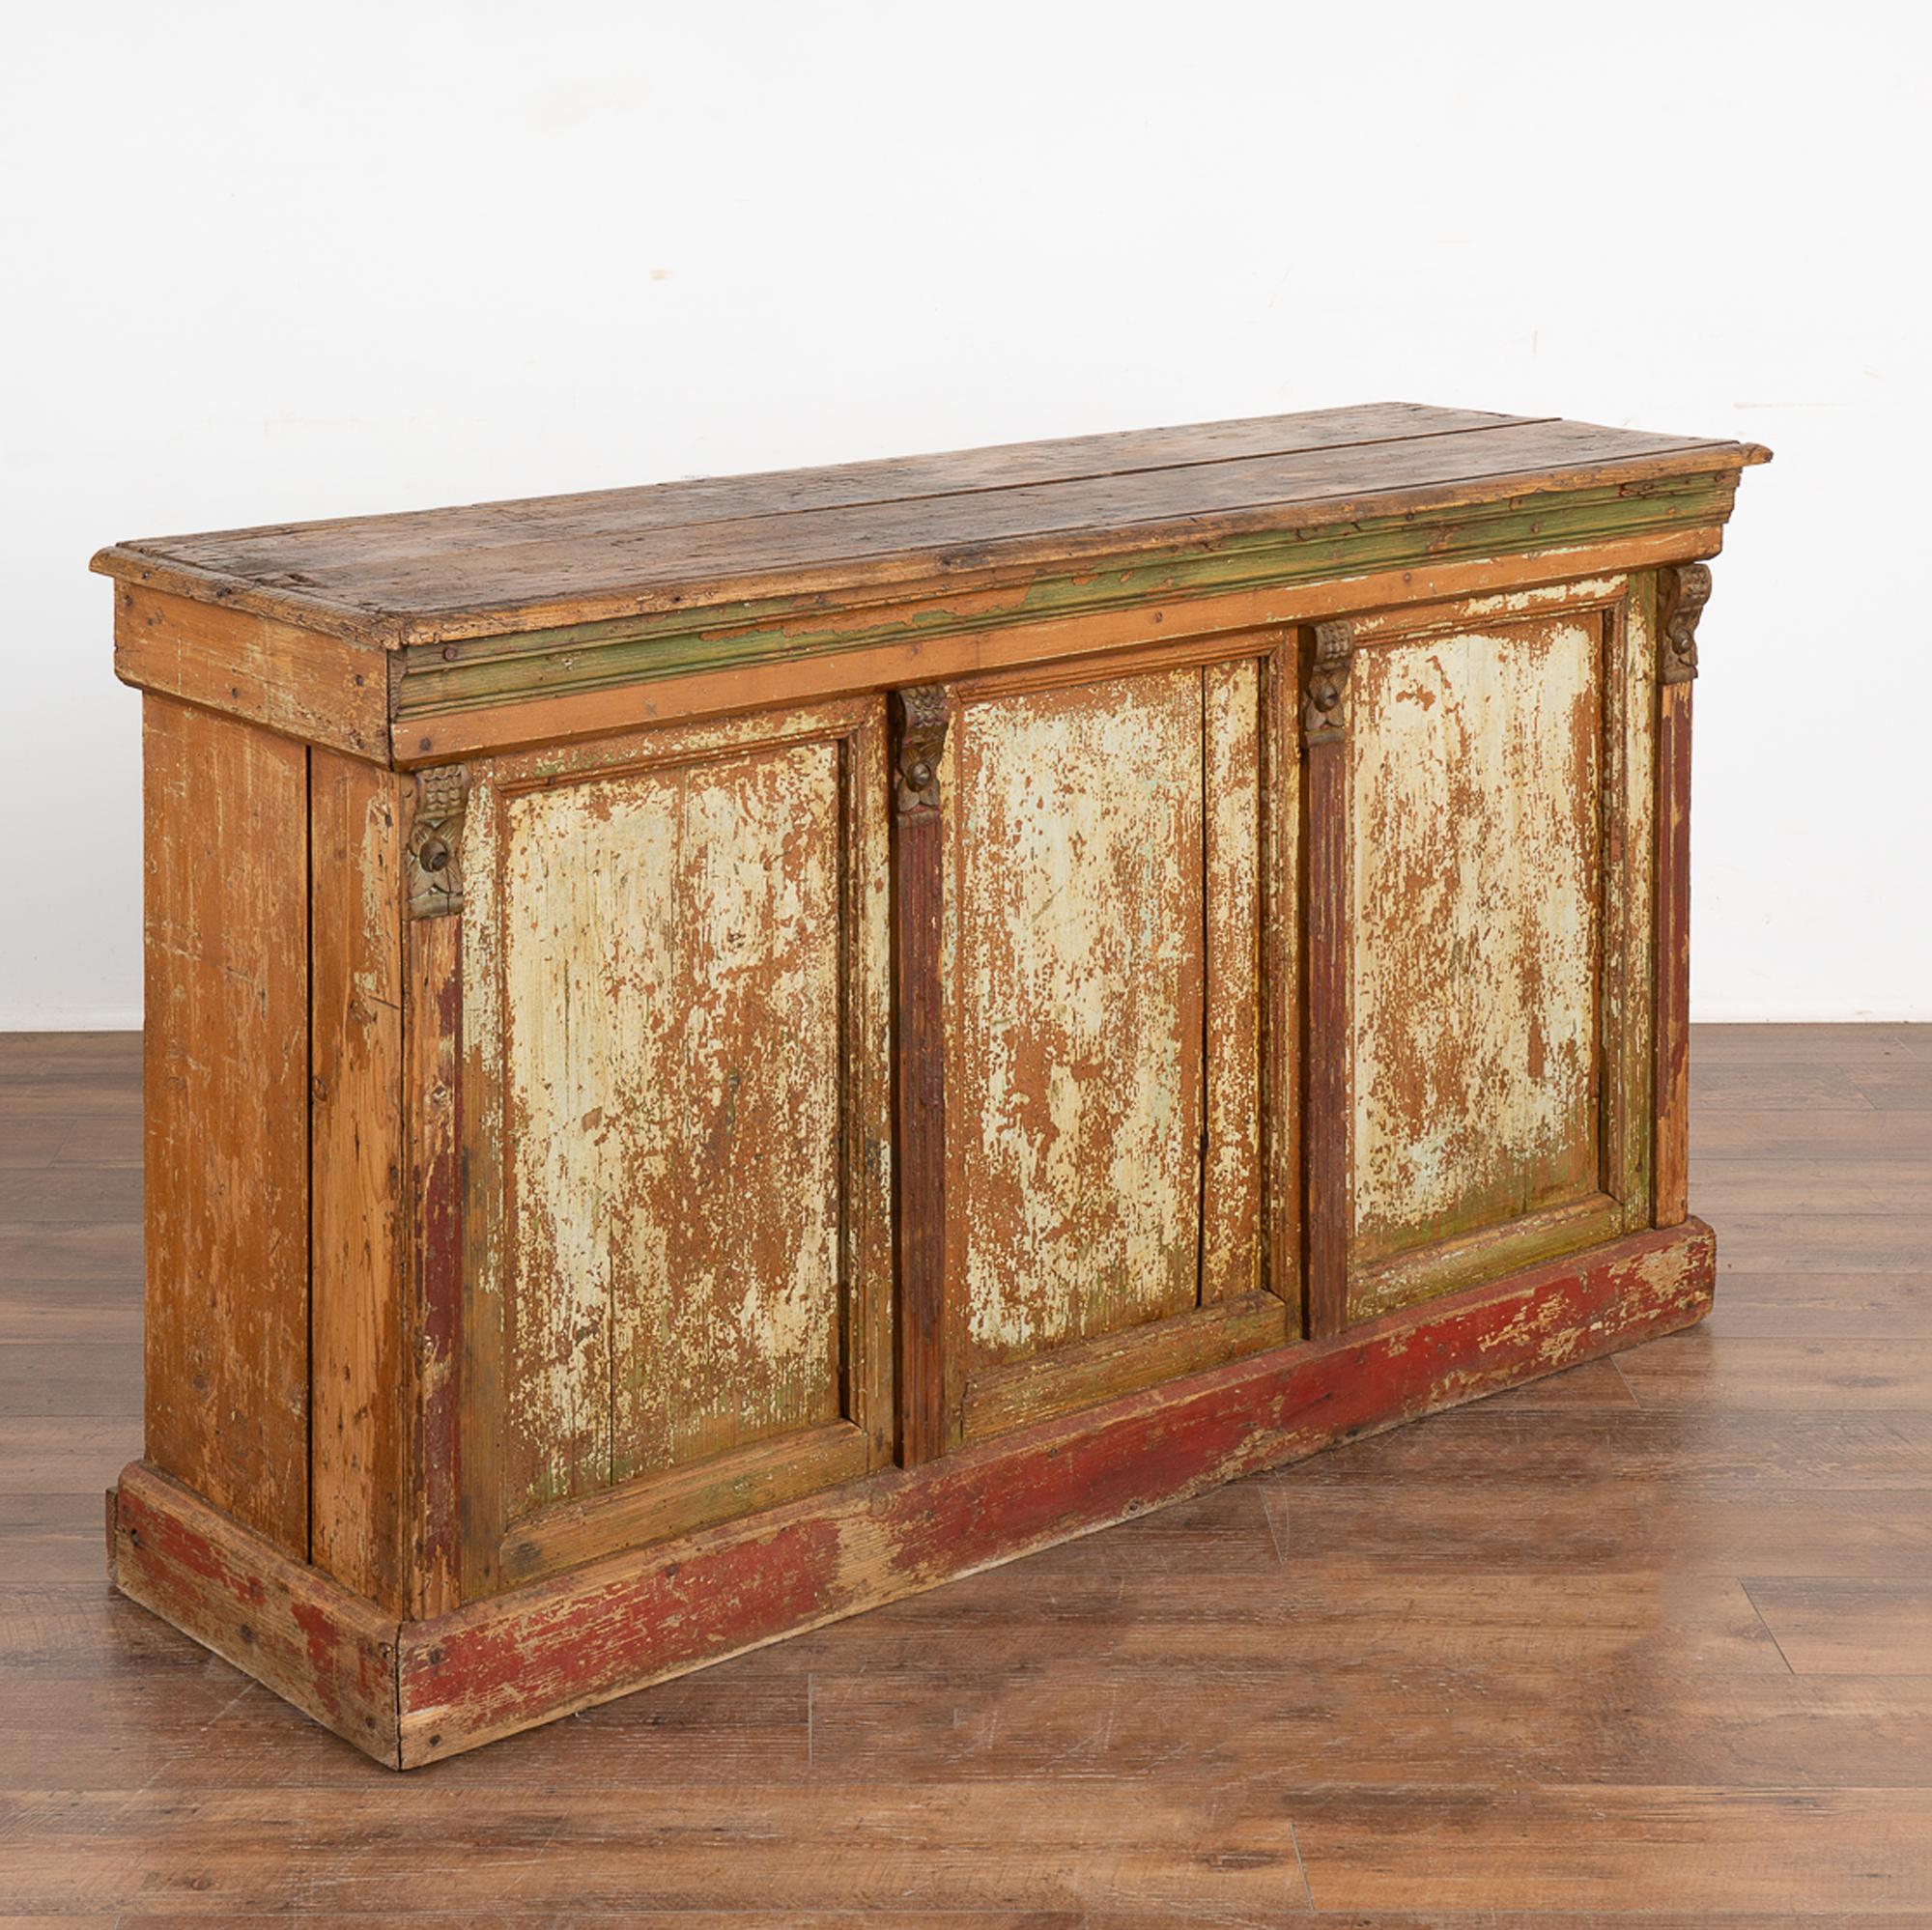 Antique 5' shop counter with original residual paint over natural pine. Yellow, green and brown paint are still visible on the open storage side, while the opposite enclosed counter has red and green trim with white on the panel doors. All the paint